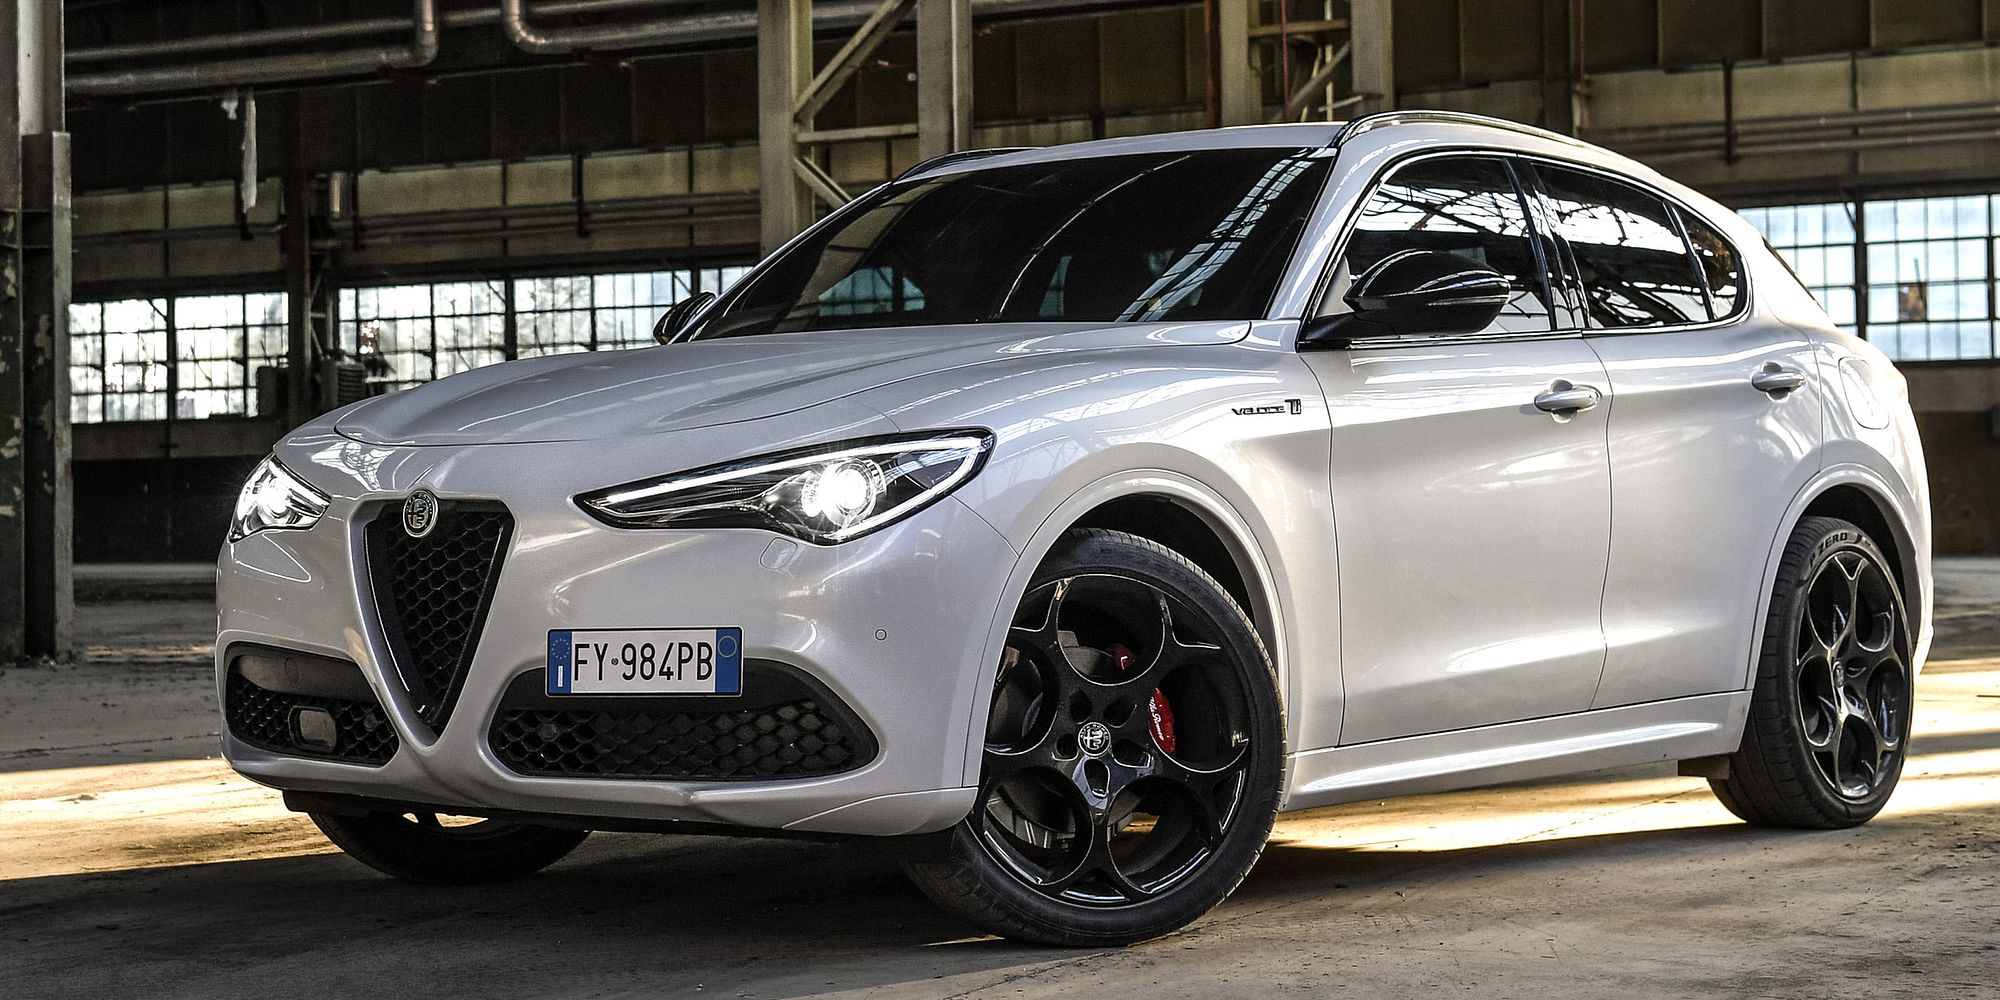 Front 3/4 view of the 2021 Stelvio in a warehouse